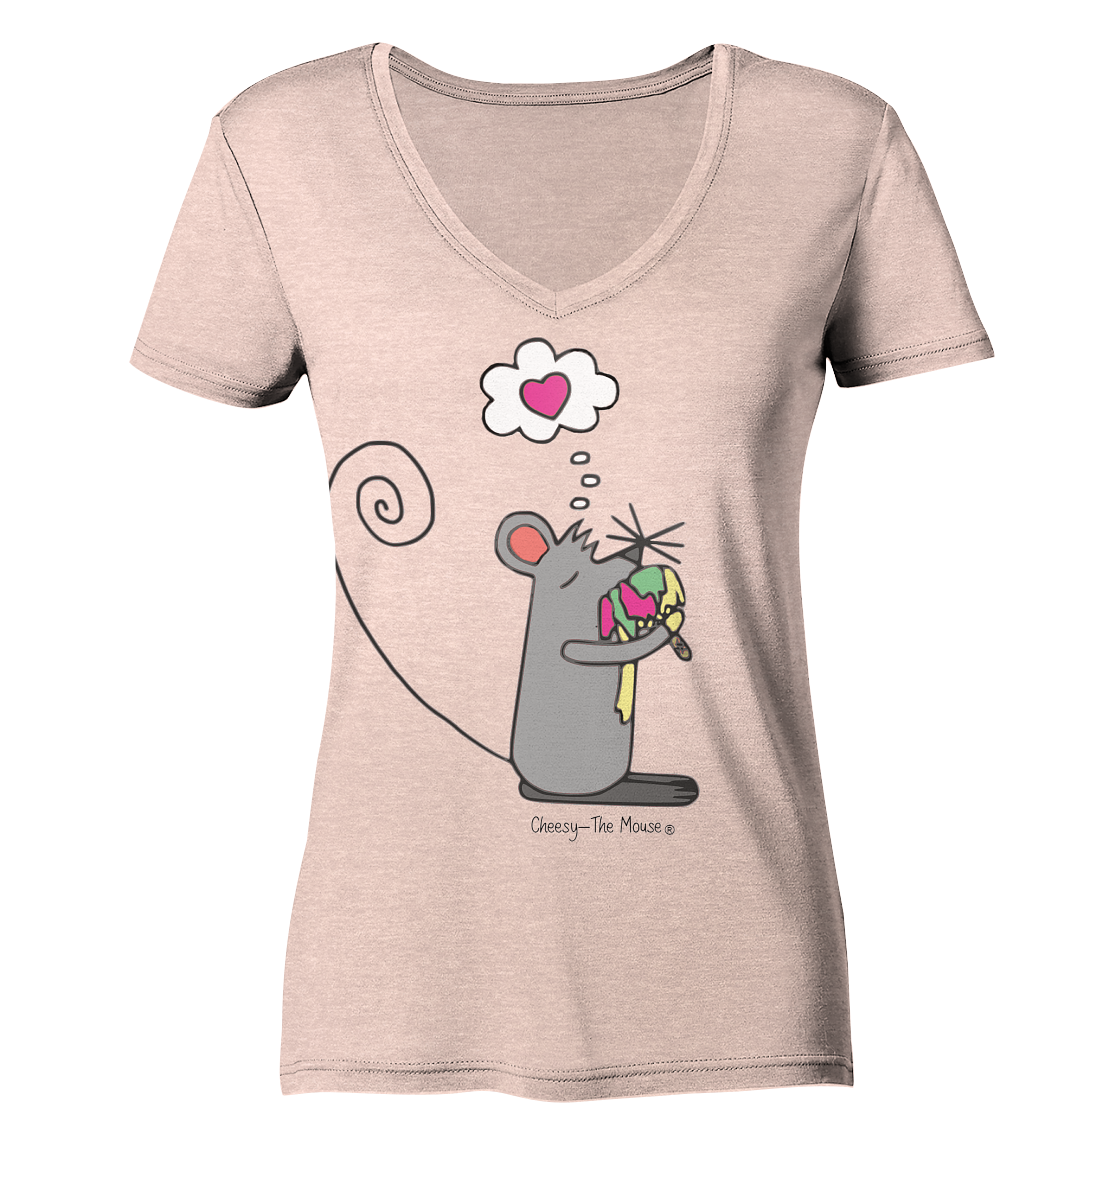 Cheesy The Mouse Ice - Ladies Organic V-Neck Shirt